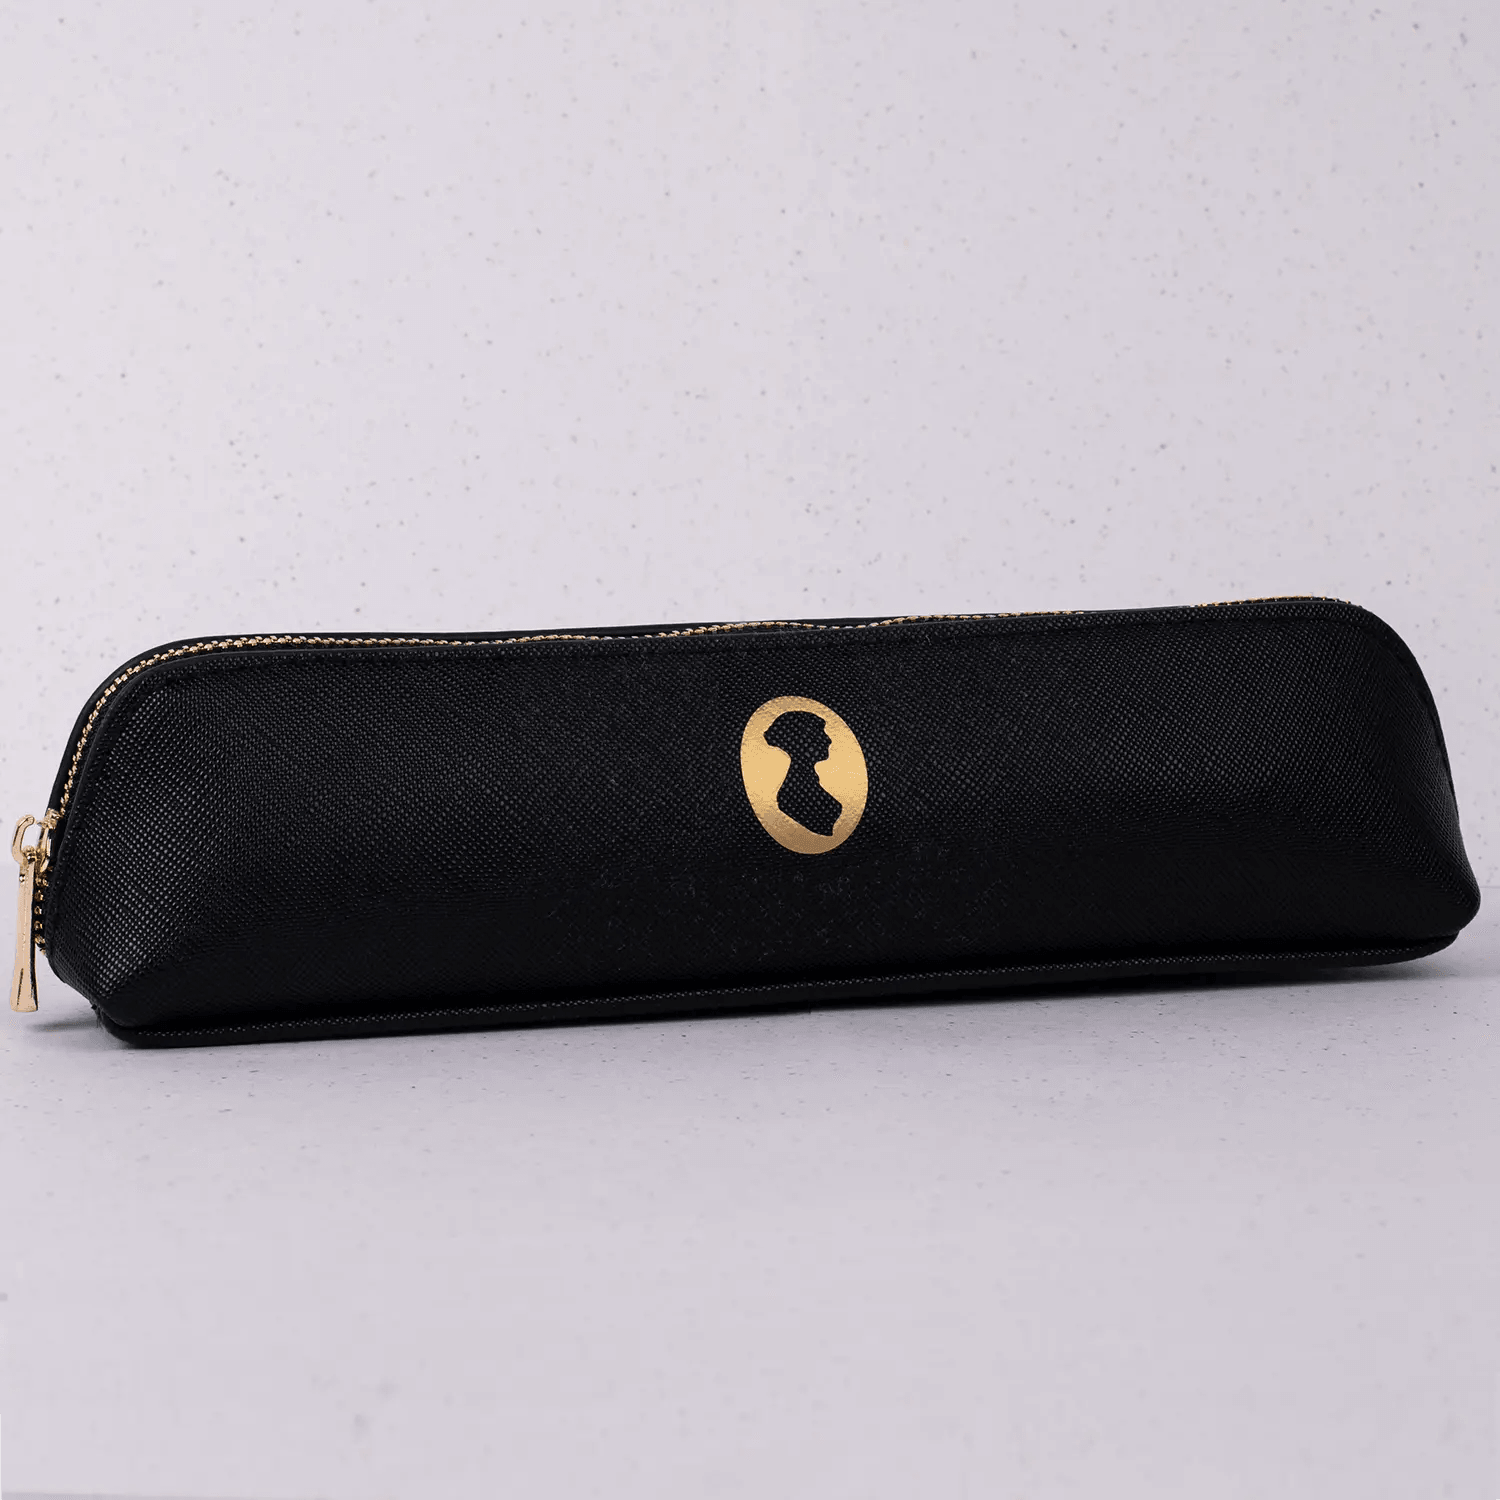 A faux leather pencil case with Jane Austen's iconic signature and silhouette. 